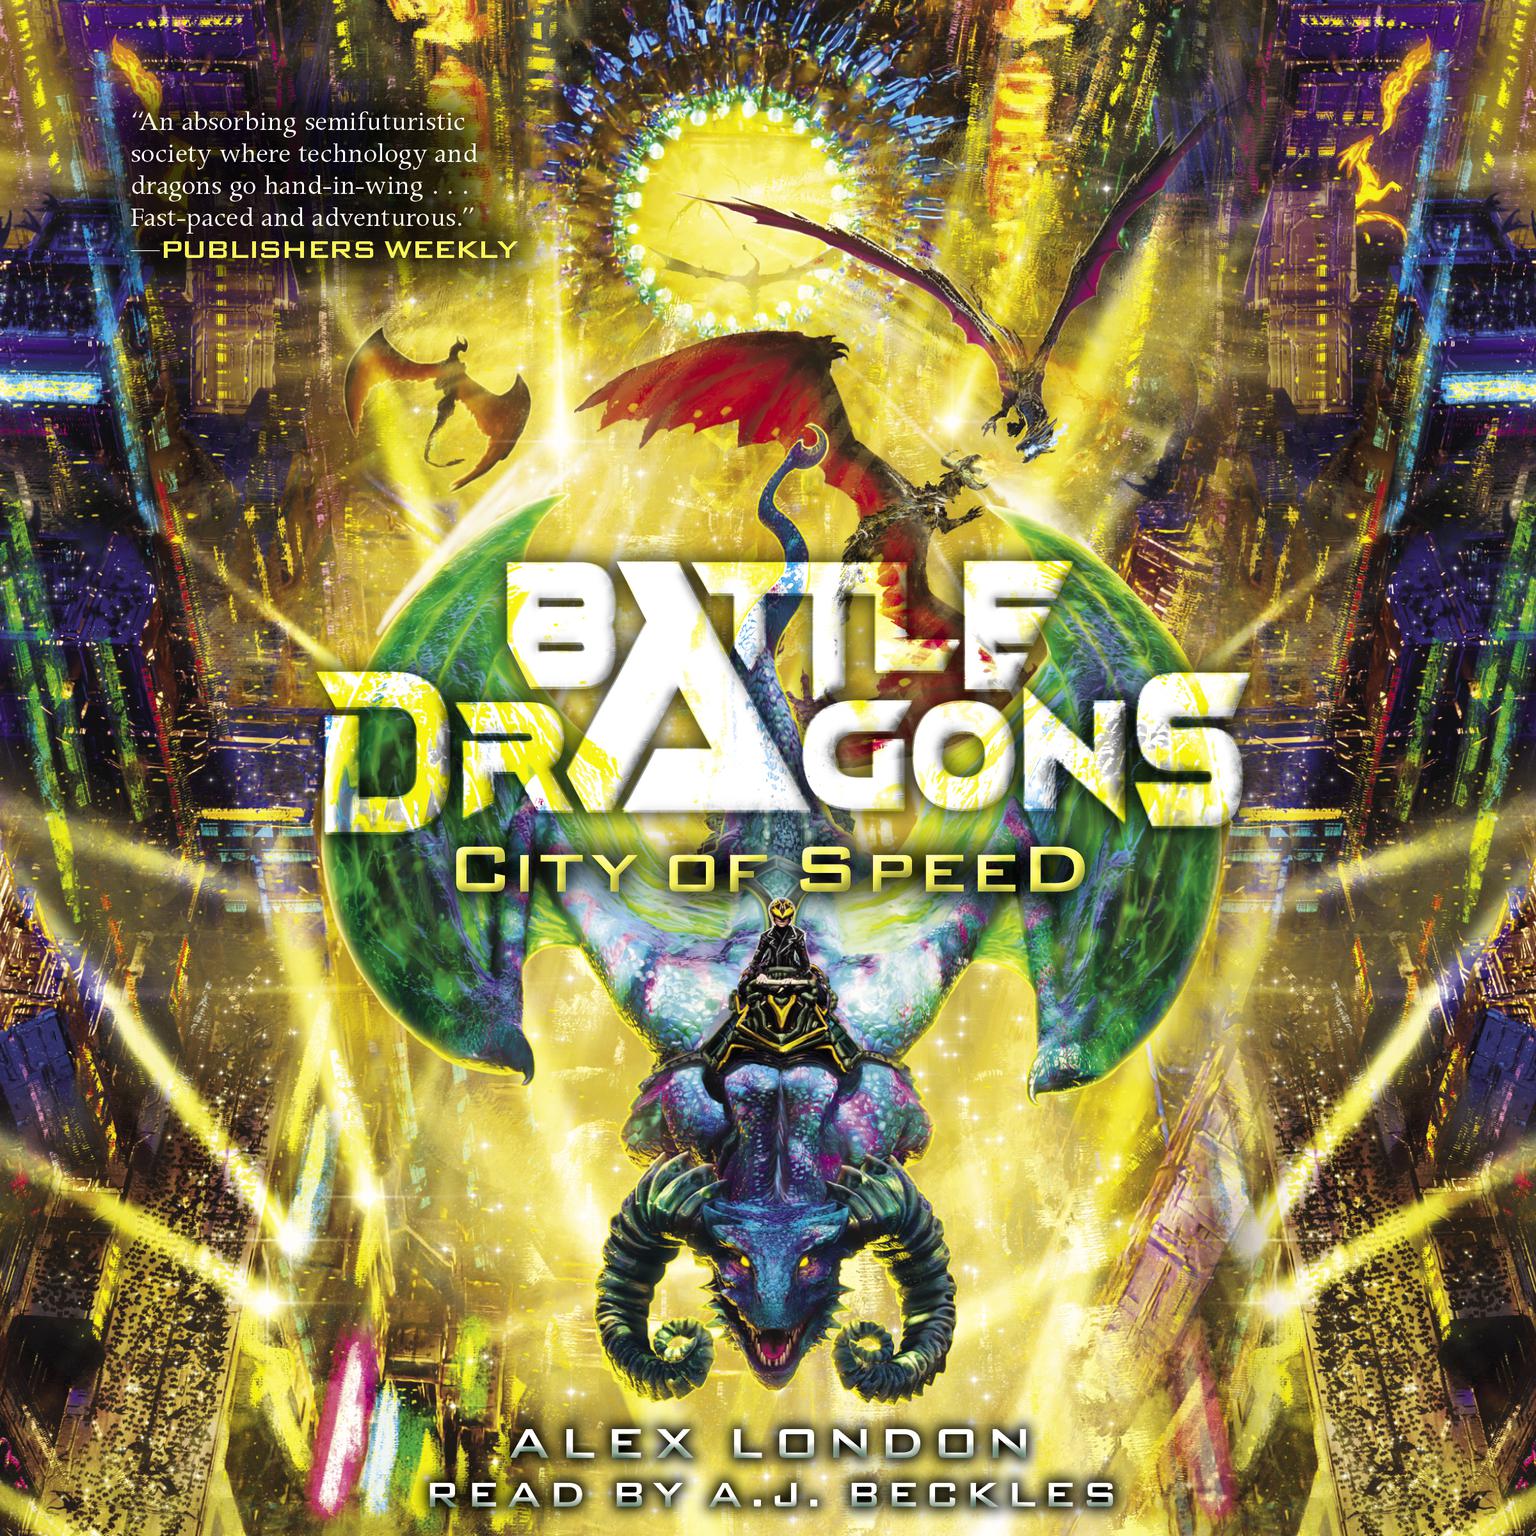 City of Speed (Battle Dragons #2) Audiobook, by Alex London